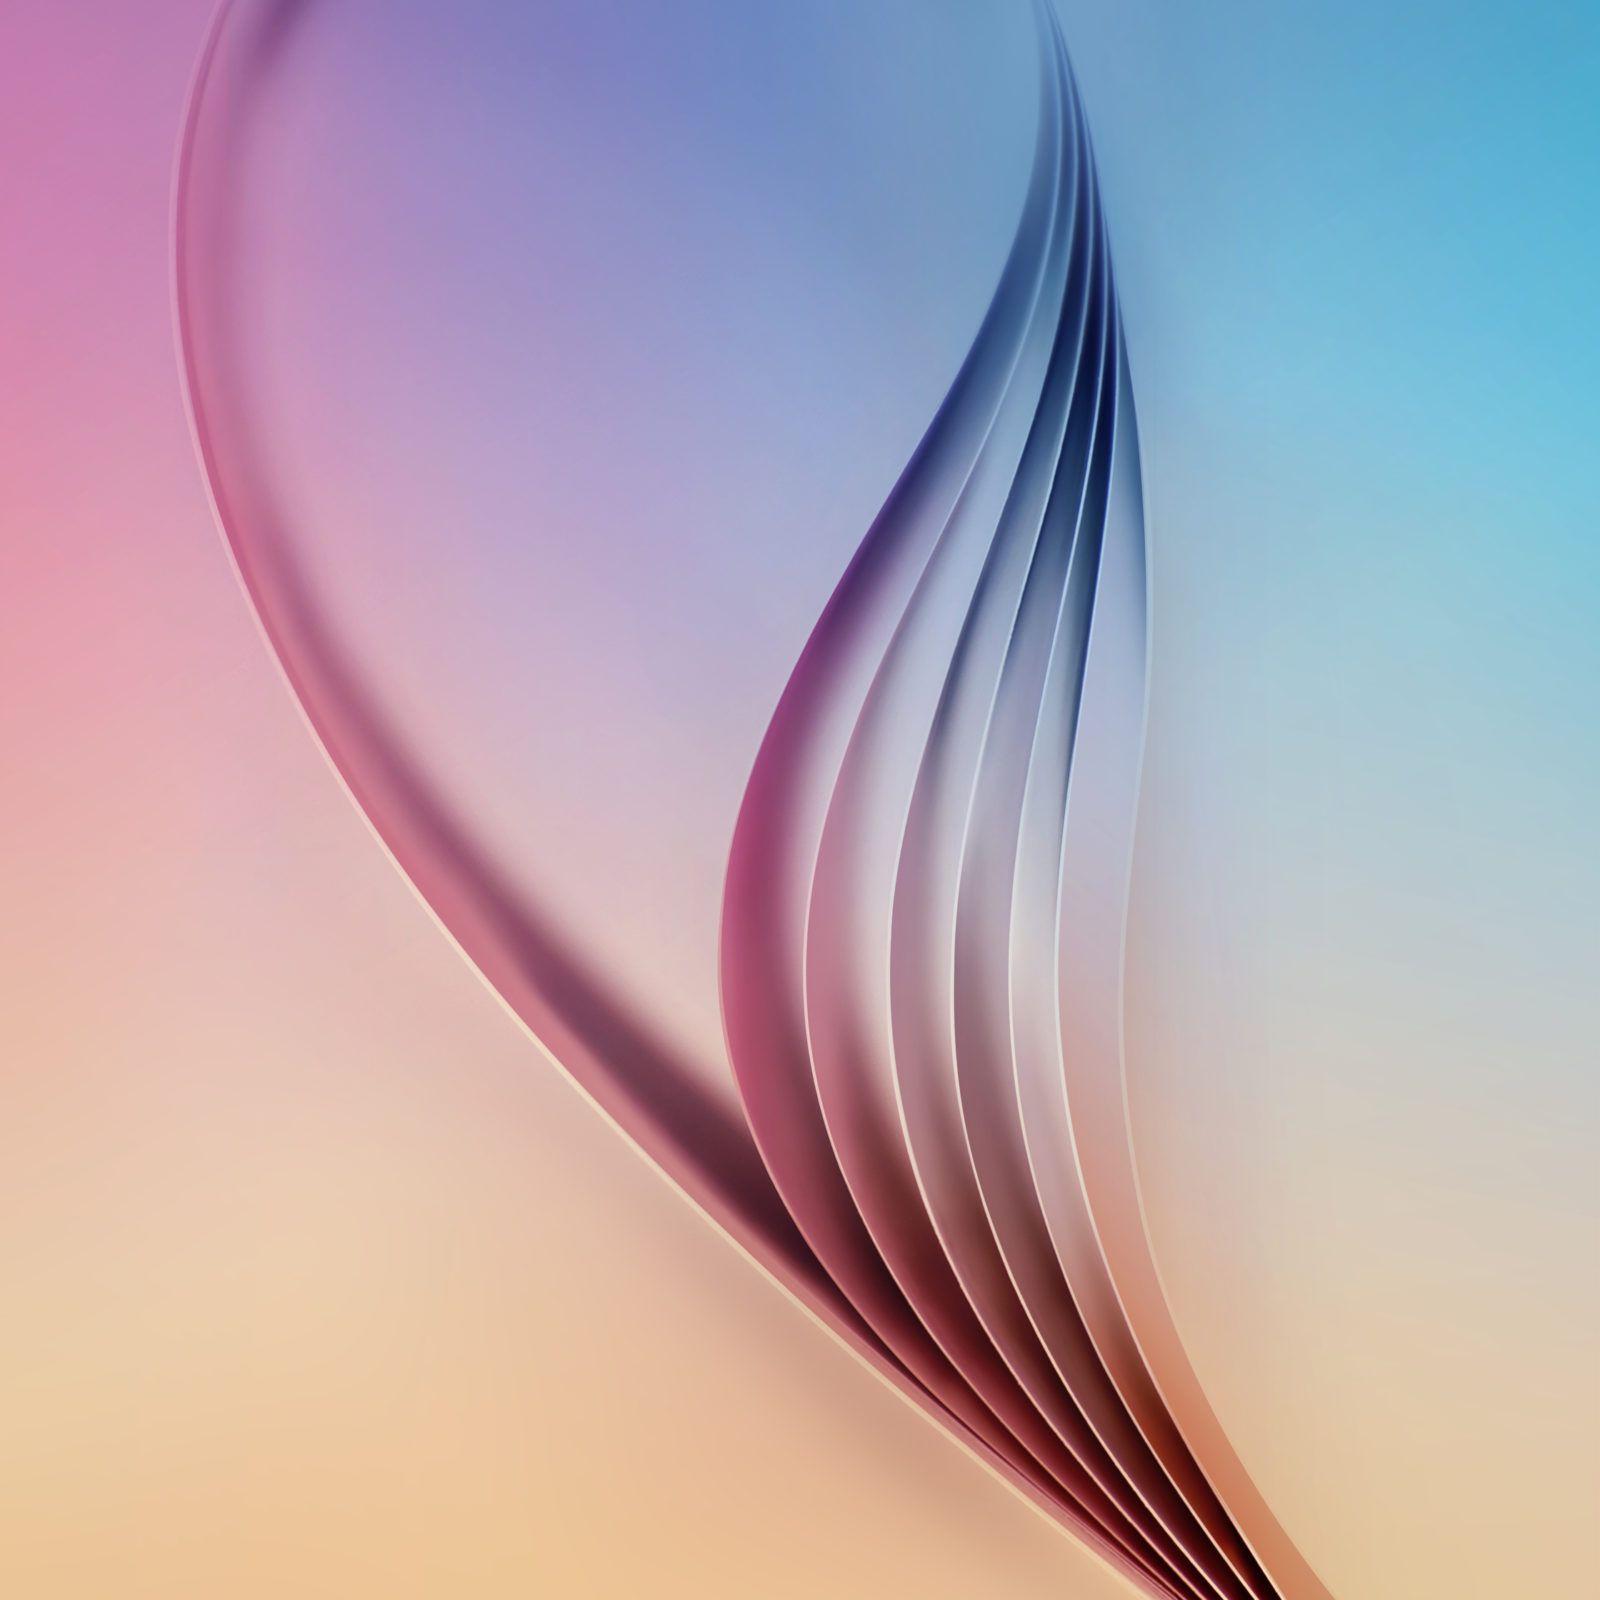 Samsung Galaxy S6 And S6 Edge Default Wallpaper Leak Before Release